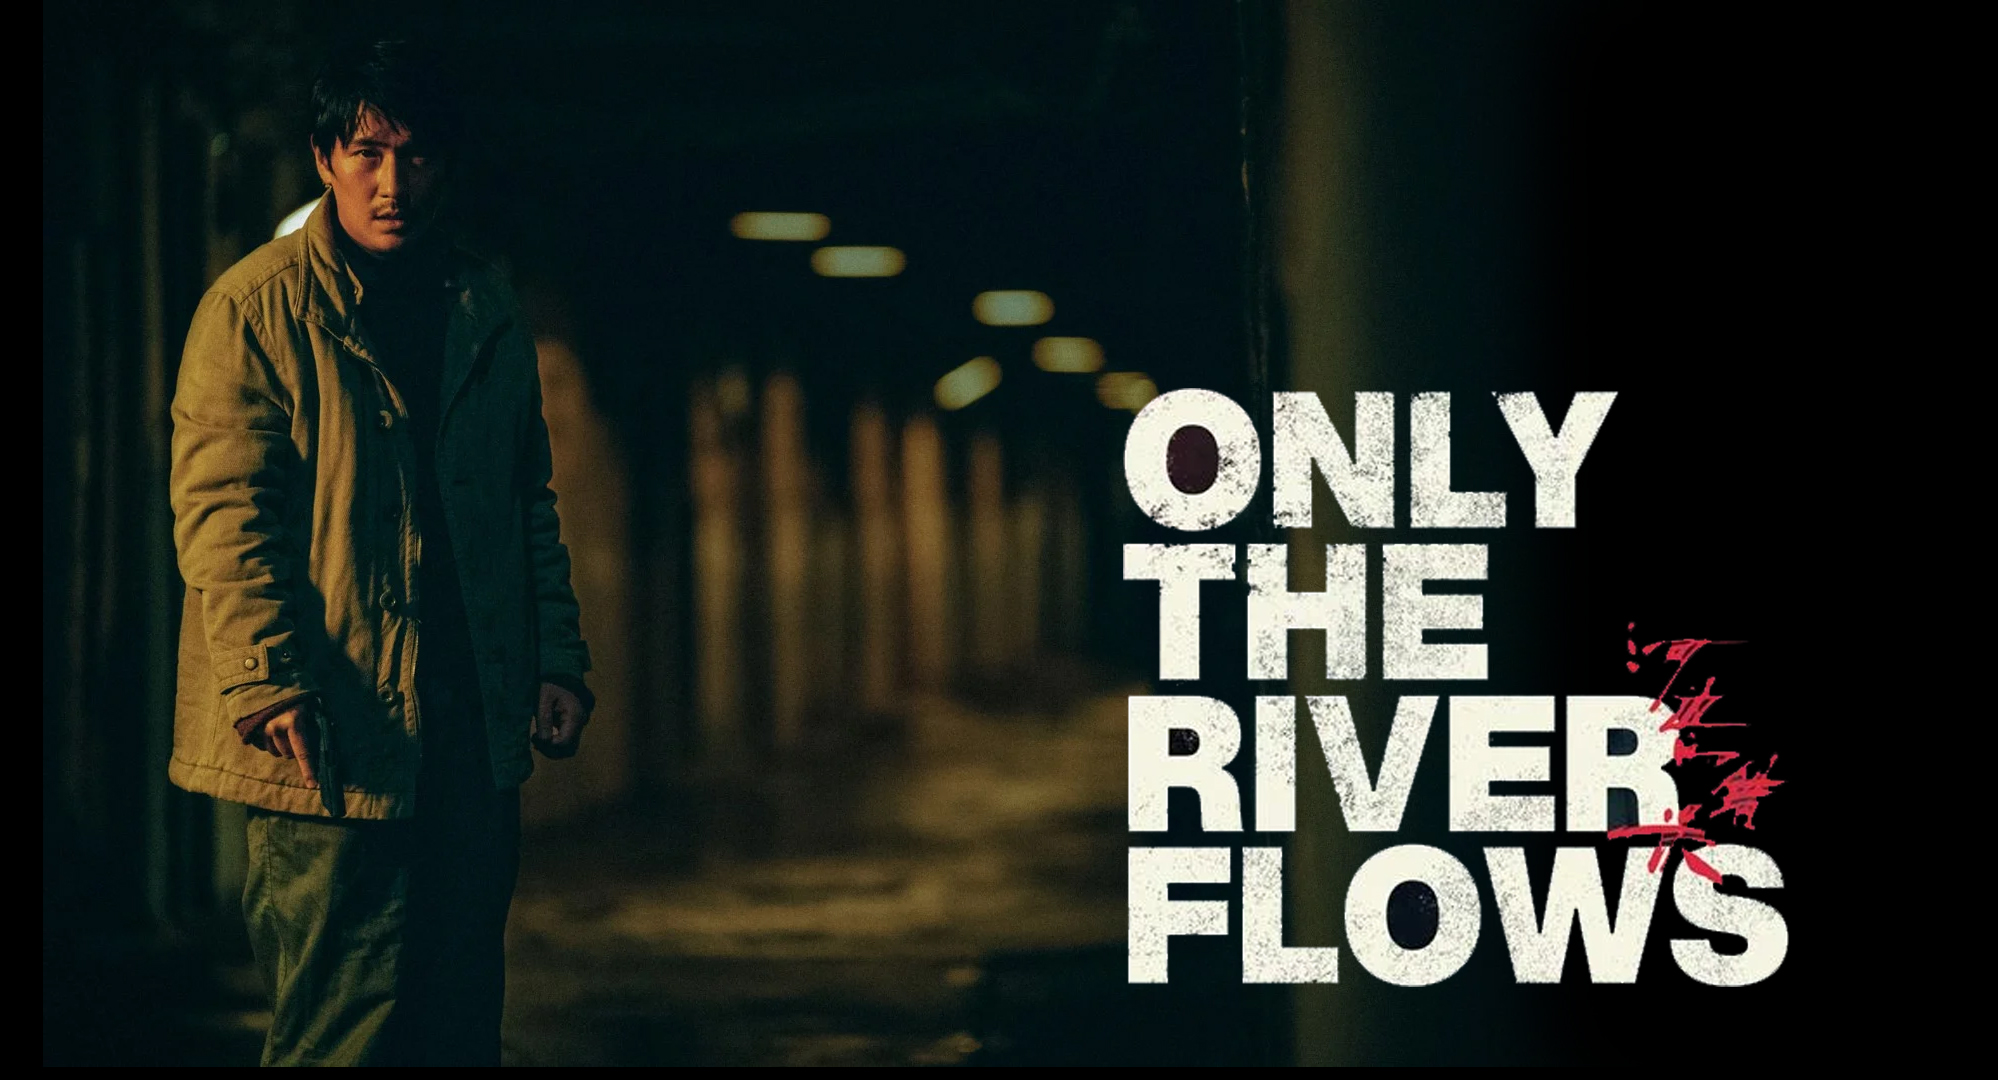 ONLY THE RIVERS FLOWS